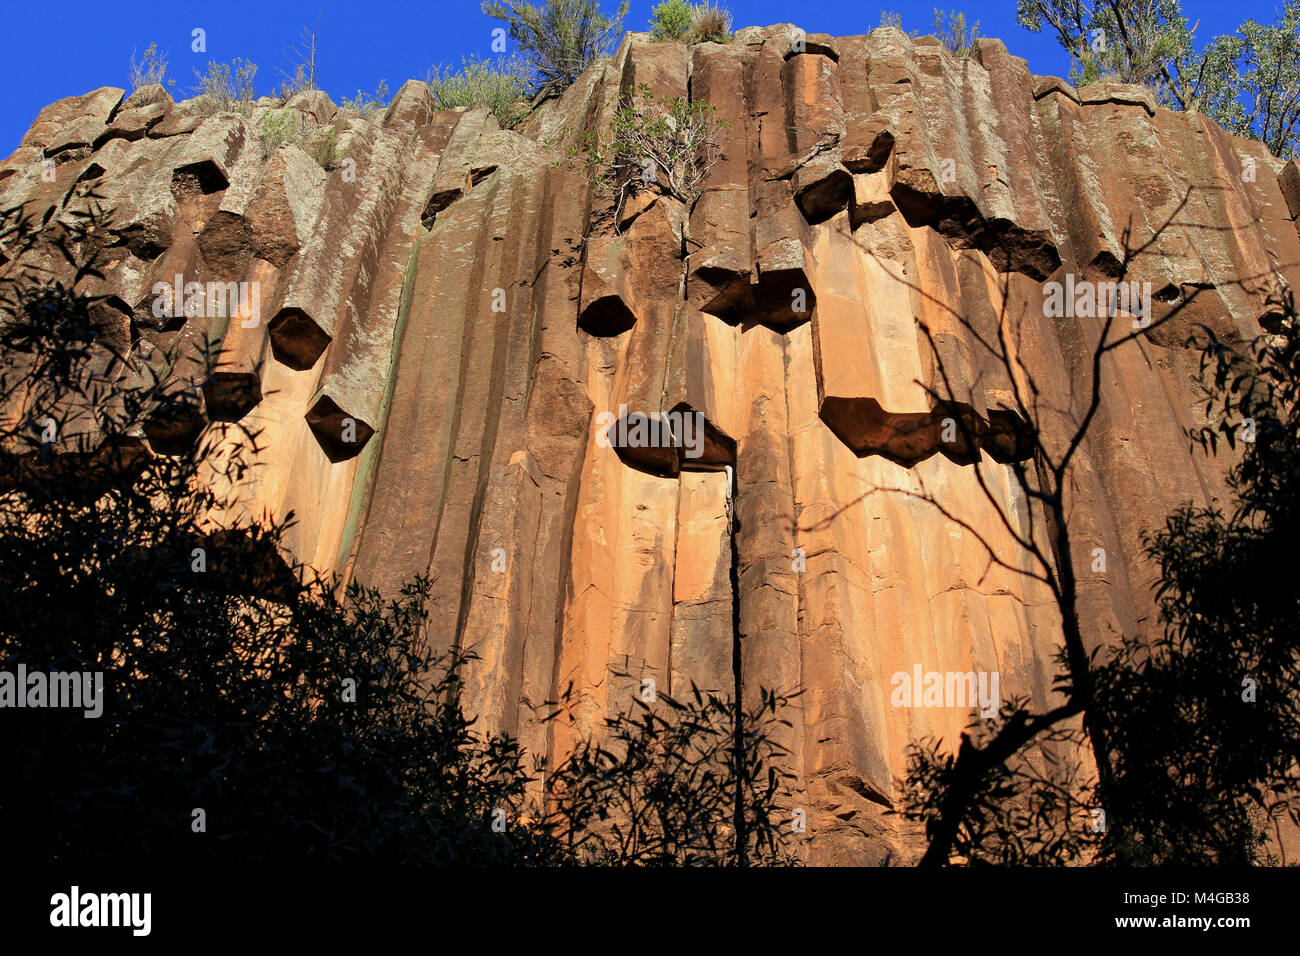 The ancient volcanic rock formation has created the organ-piping effect at Sawn Rocks, Narrabri, New South Wales, Australia. Stock Photo